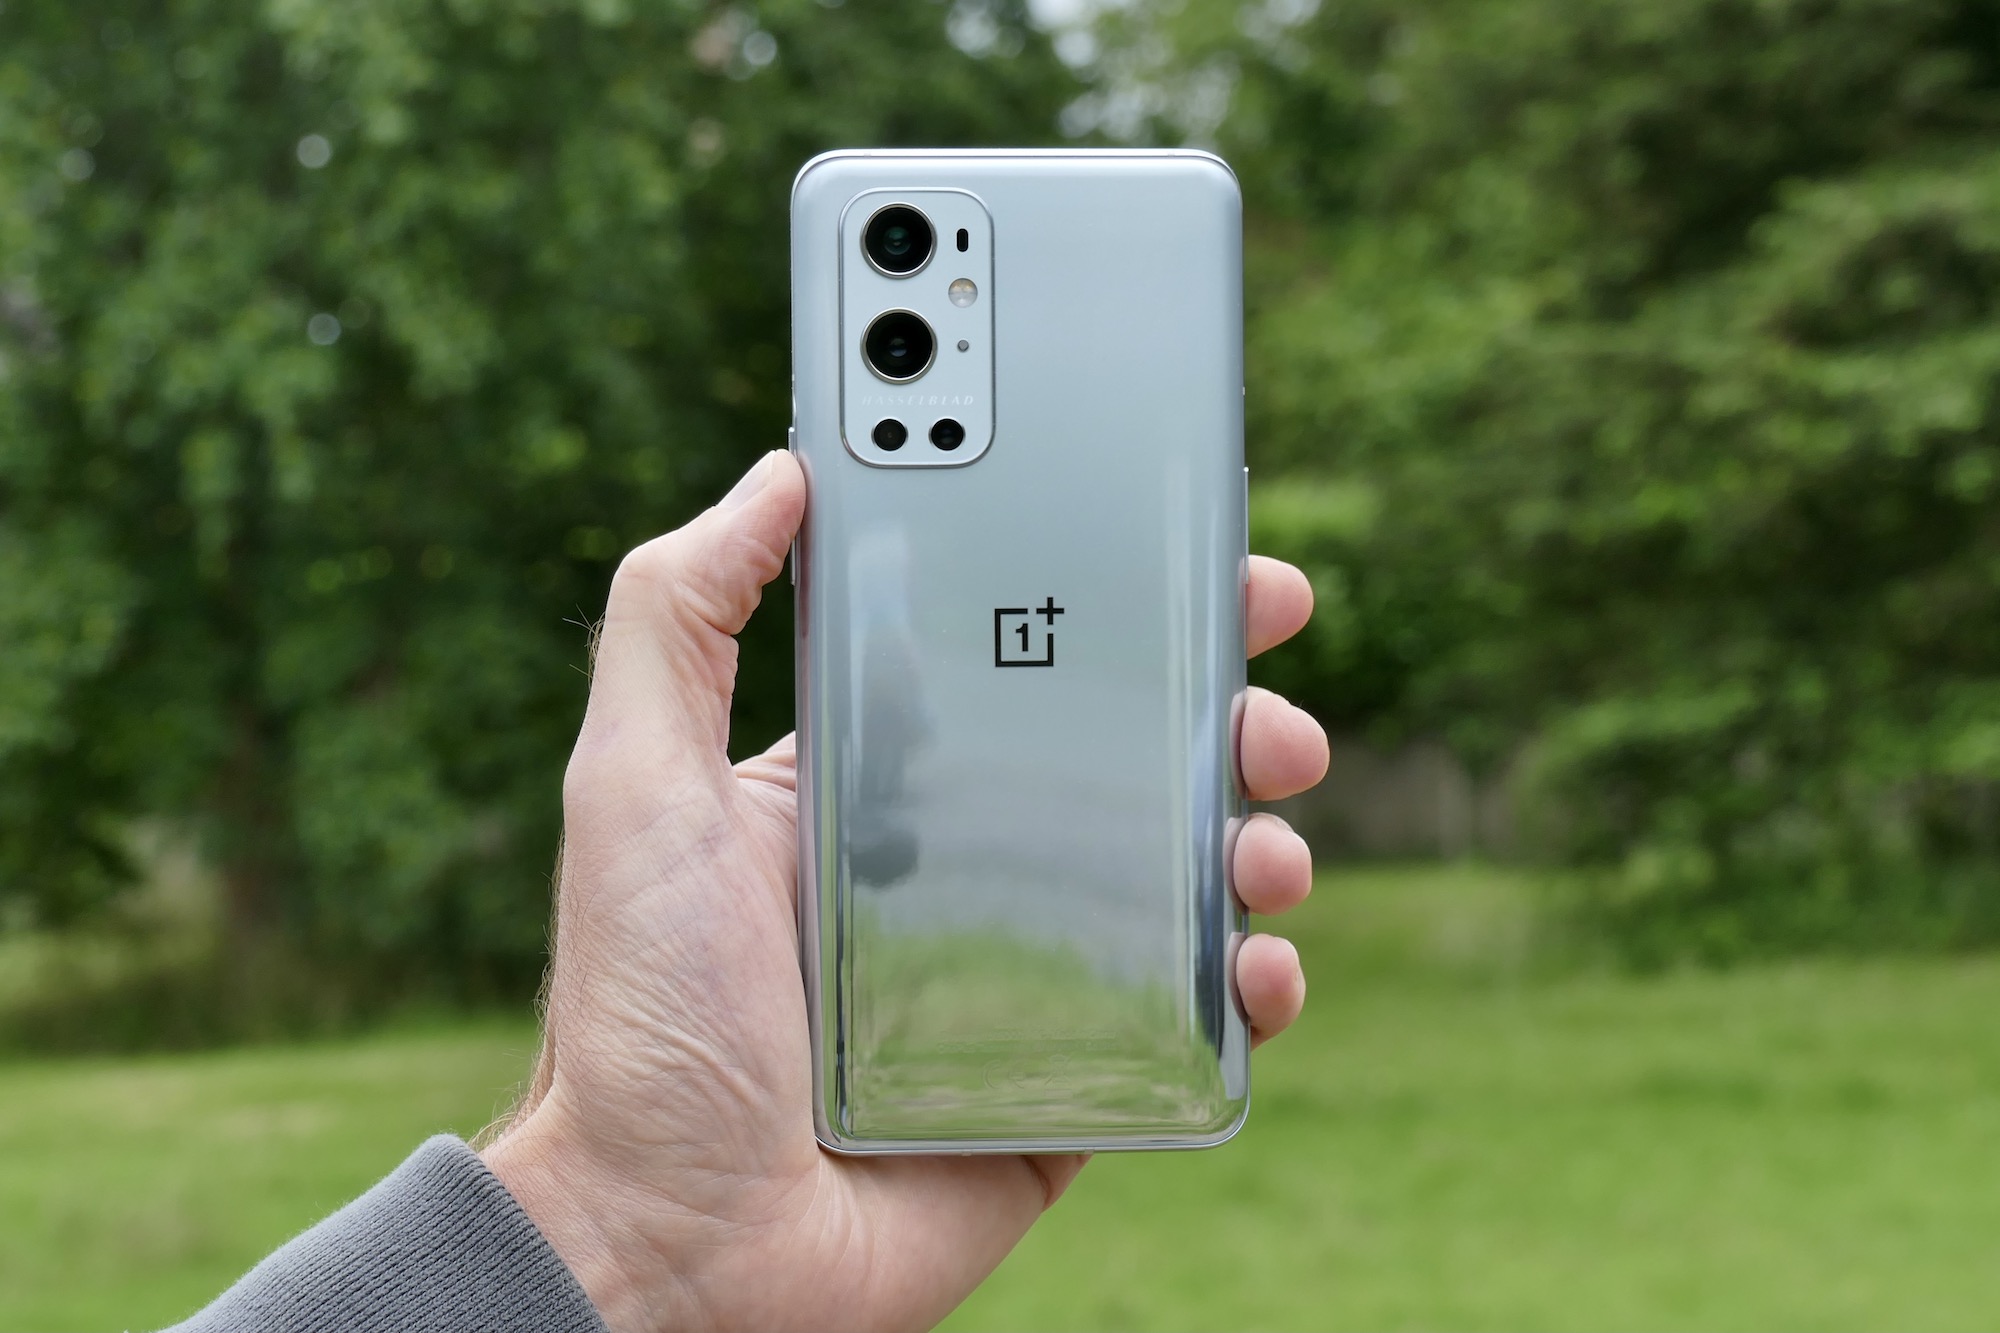 OnePlus 9 Pro shown from the back.